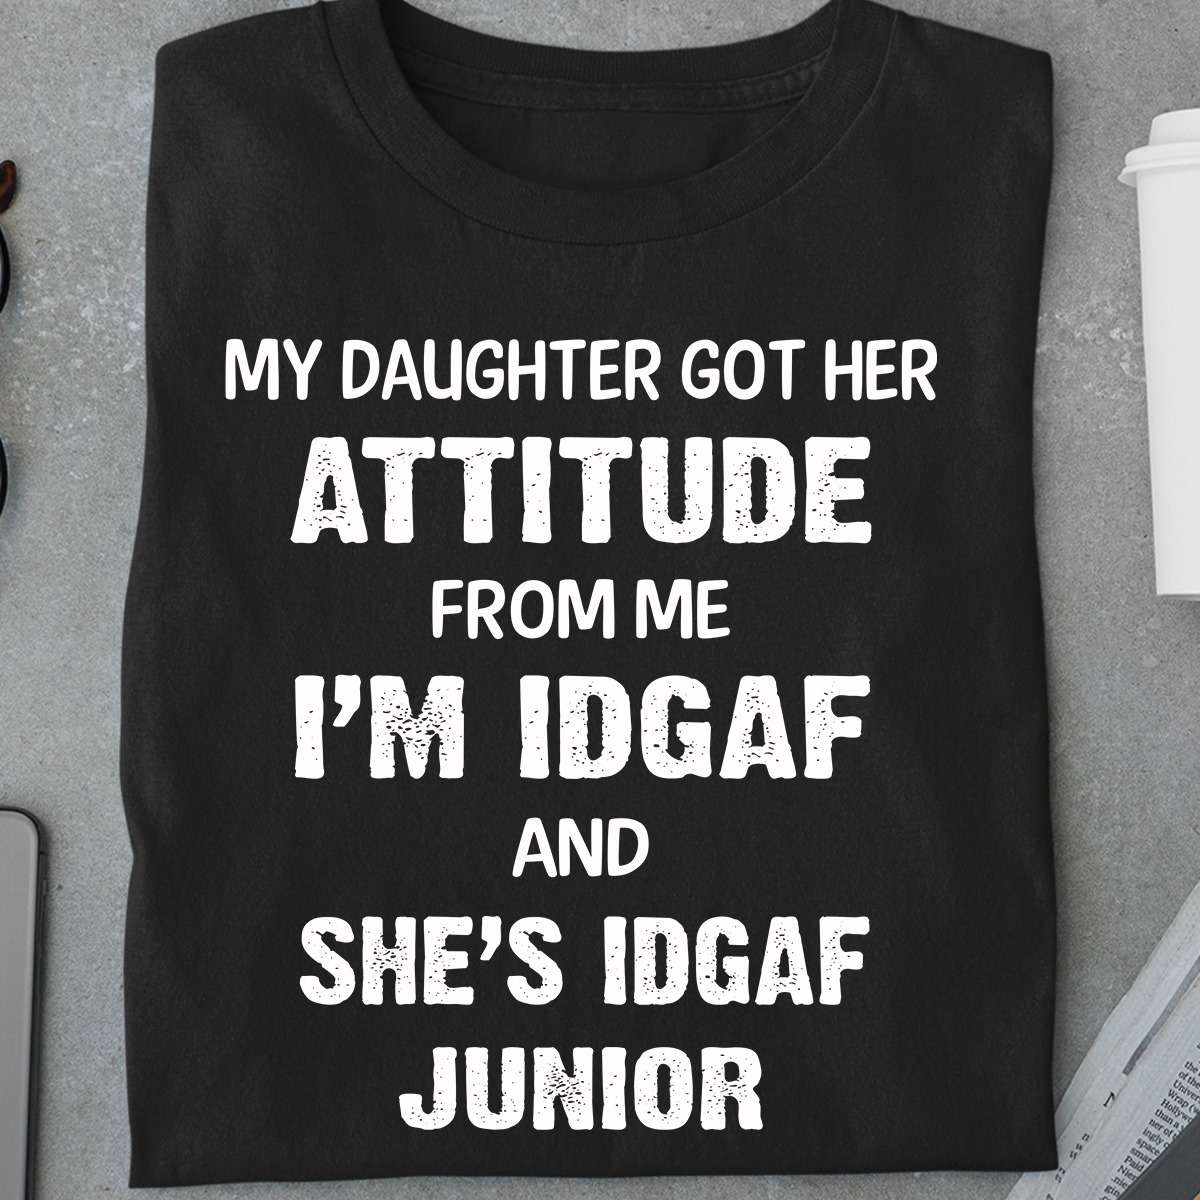 My daughter got her attitude from me - I'm IDGAF and she's IDGAF Junior